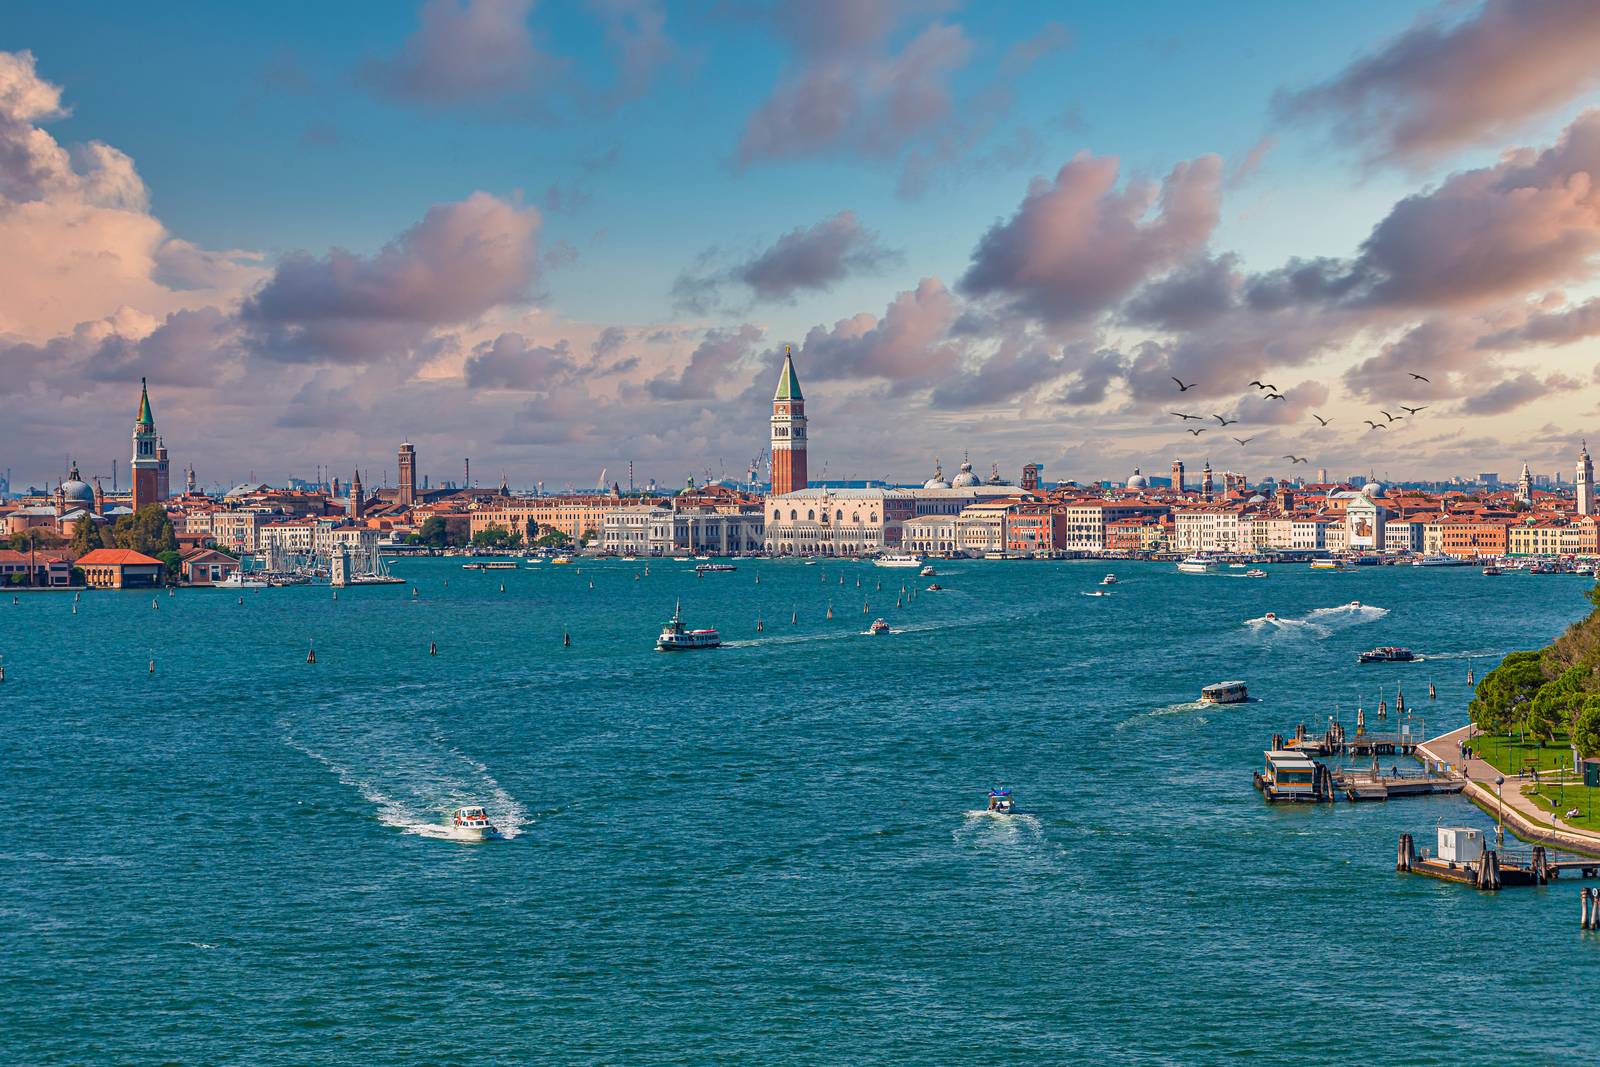 Approaching Venice from the Sea by dbvirago